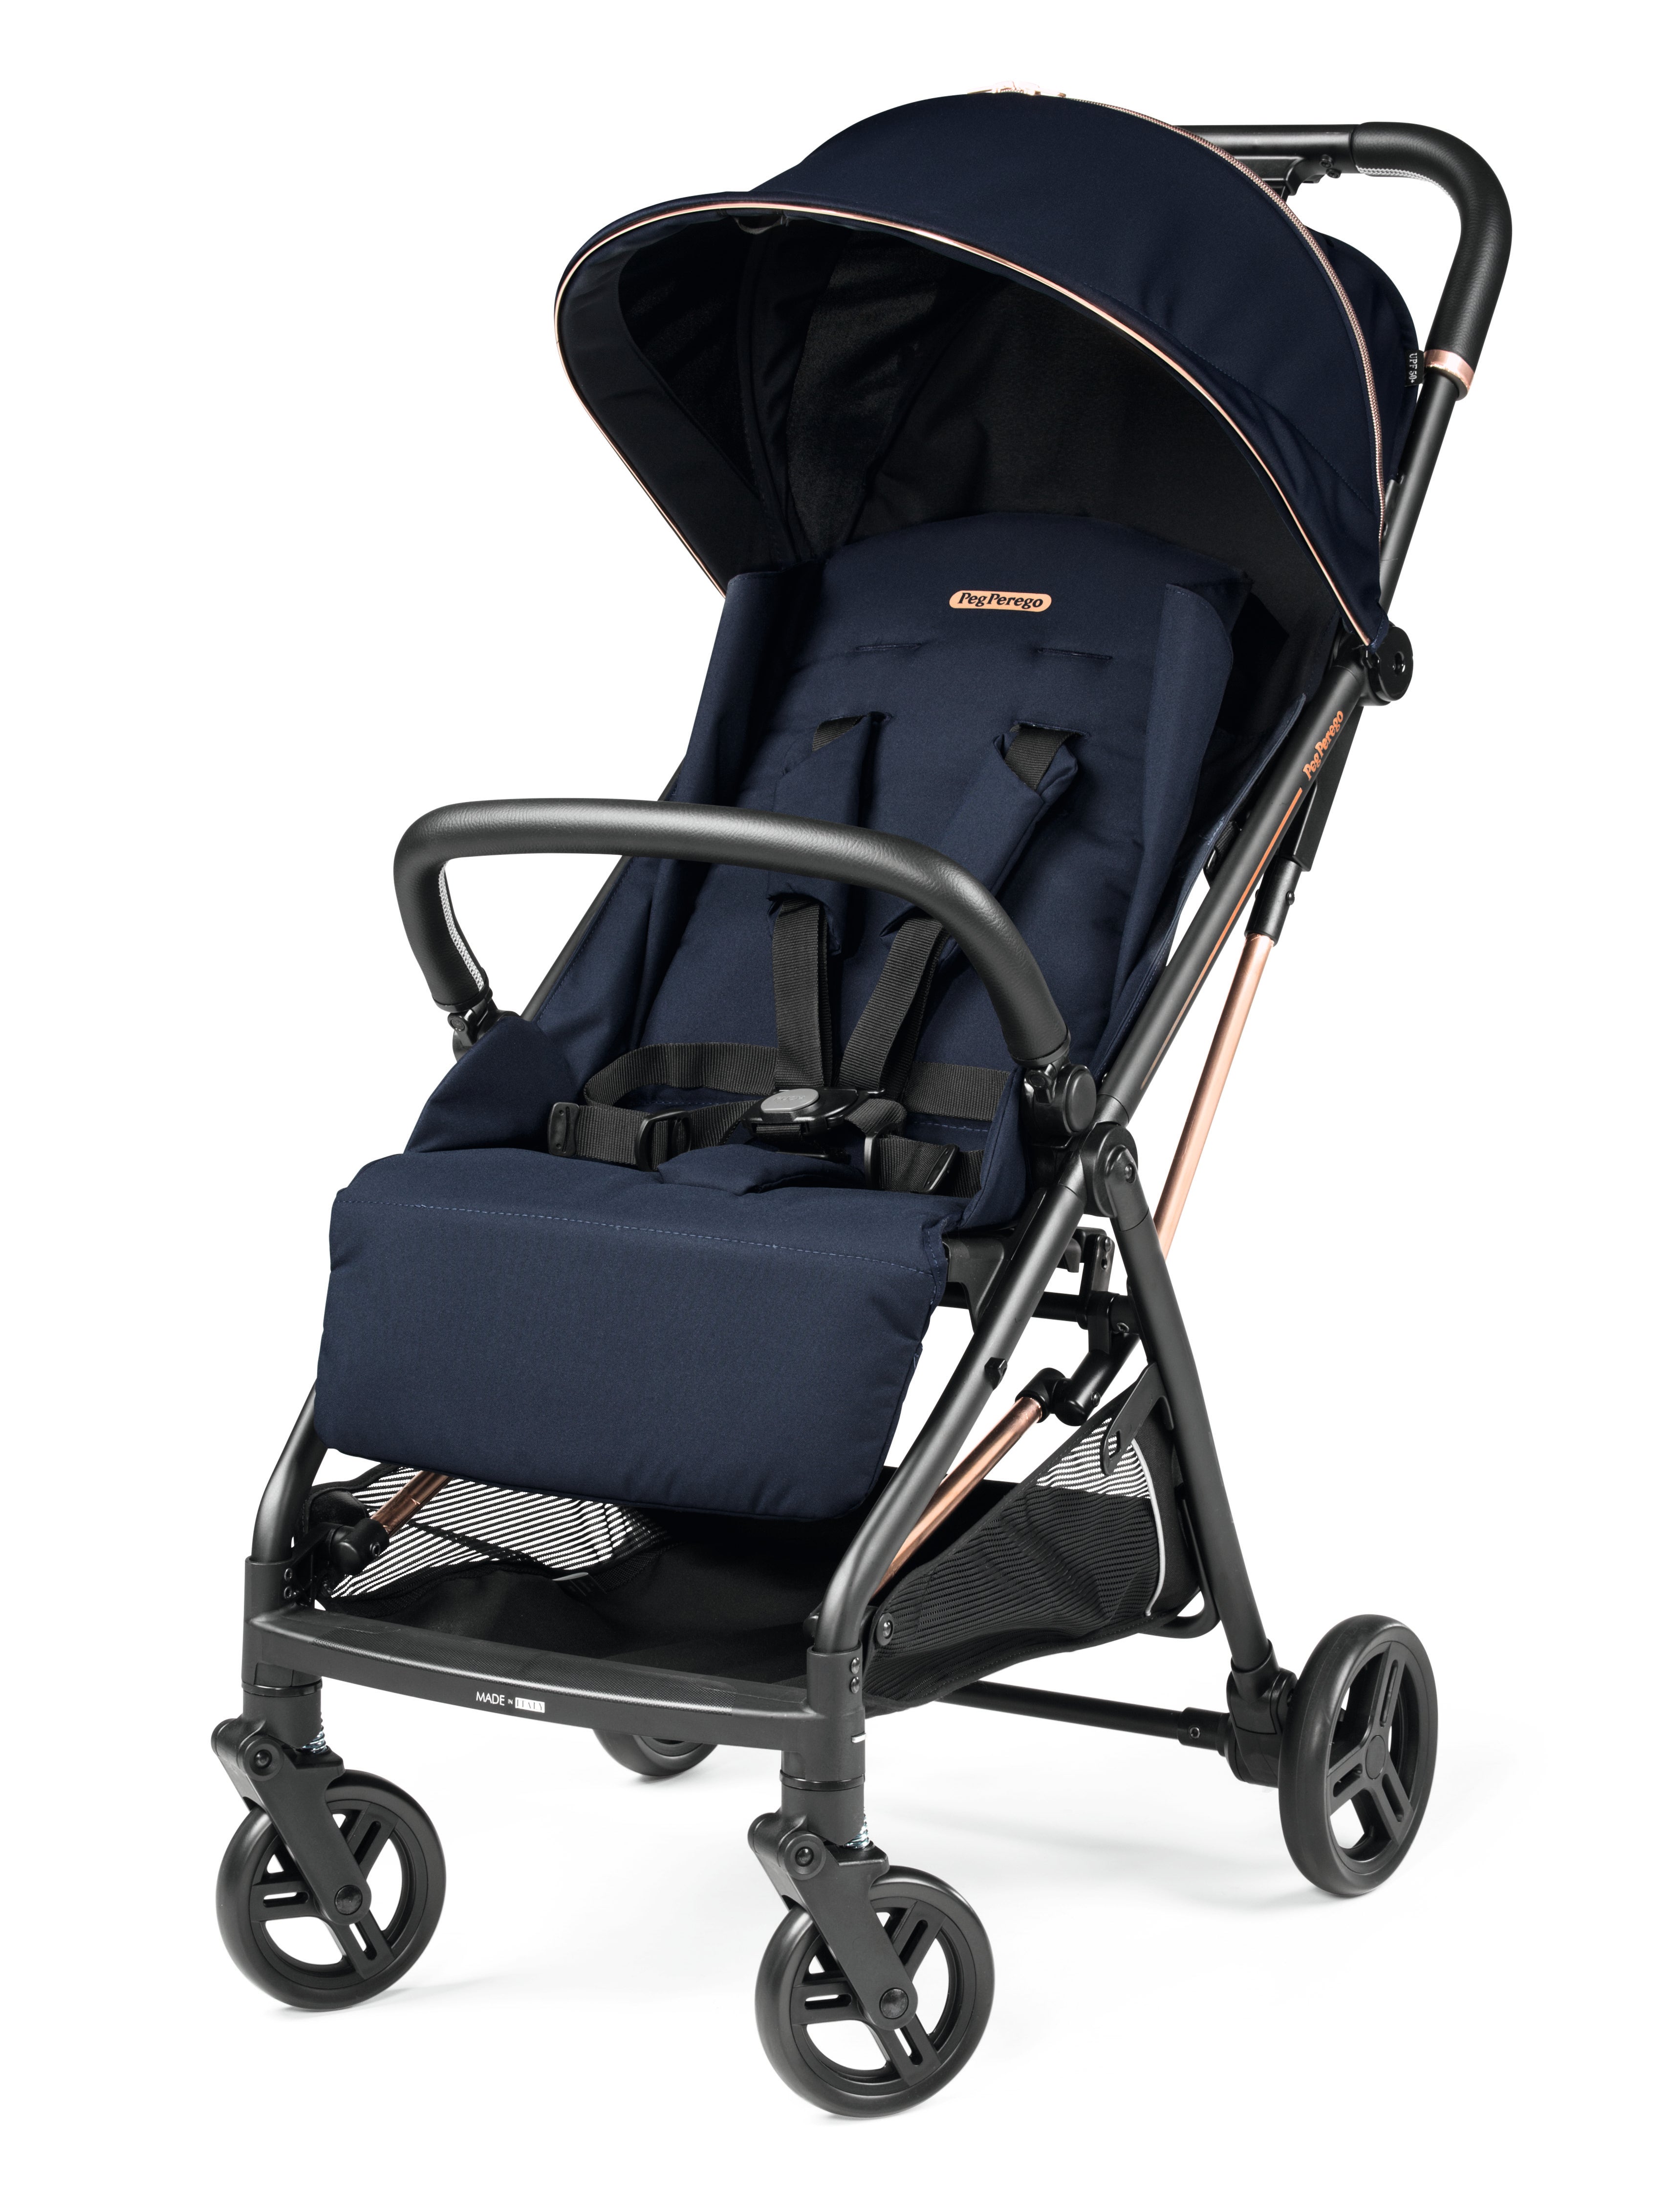 Selfie Stroller Blue Shine - Trendy, Compact, and Lightweight Stroller for Babies. Now available on CB Baby online shop in South Africa.